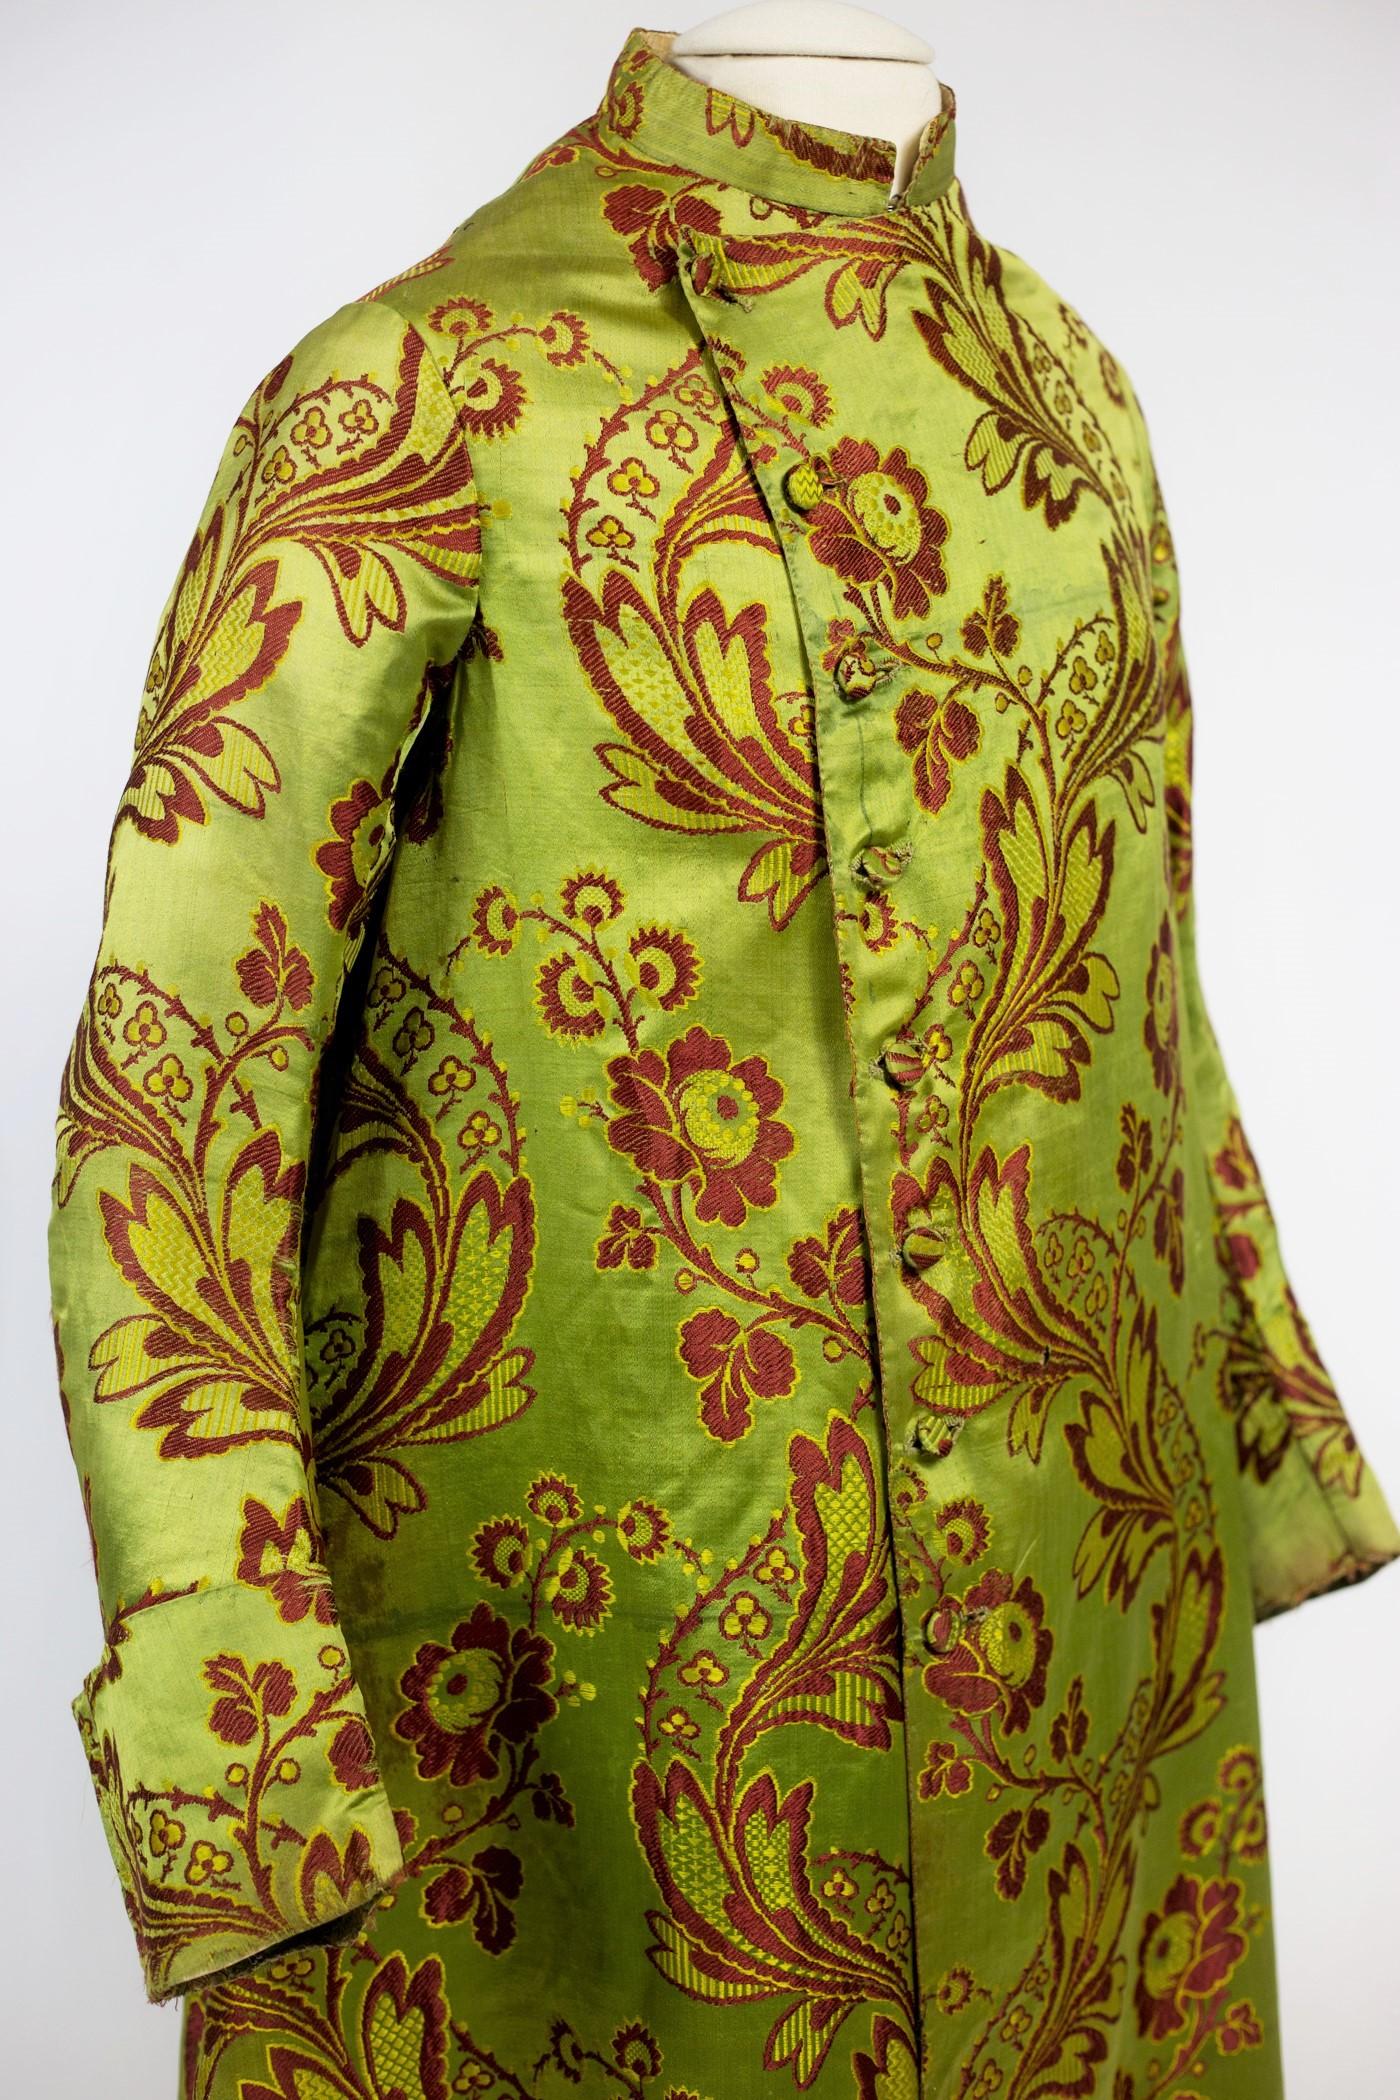 Circa 1750- 1770
France

A Museum piece. Banyan in green-yellow brocaded satin (5-end satin) with en rivière floral decoration whose pattern is made of four lengths of 51 cm wide each. Crossed front and pyramidal cut, closed with eight covered